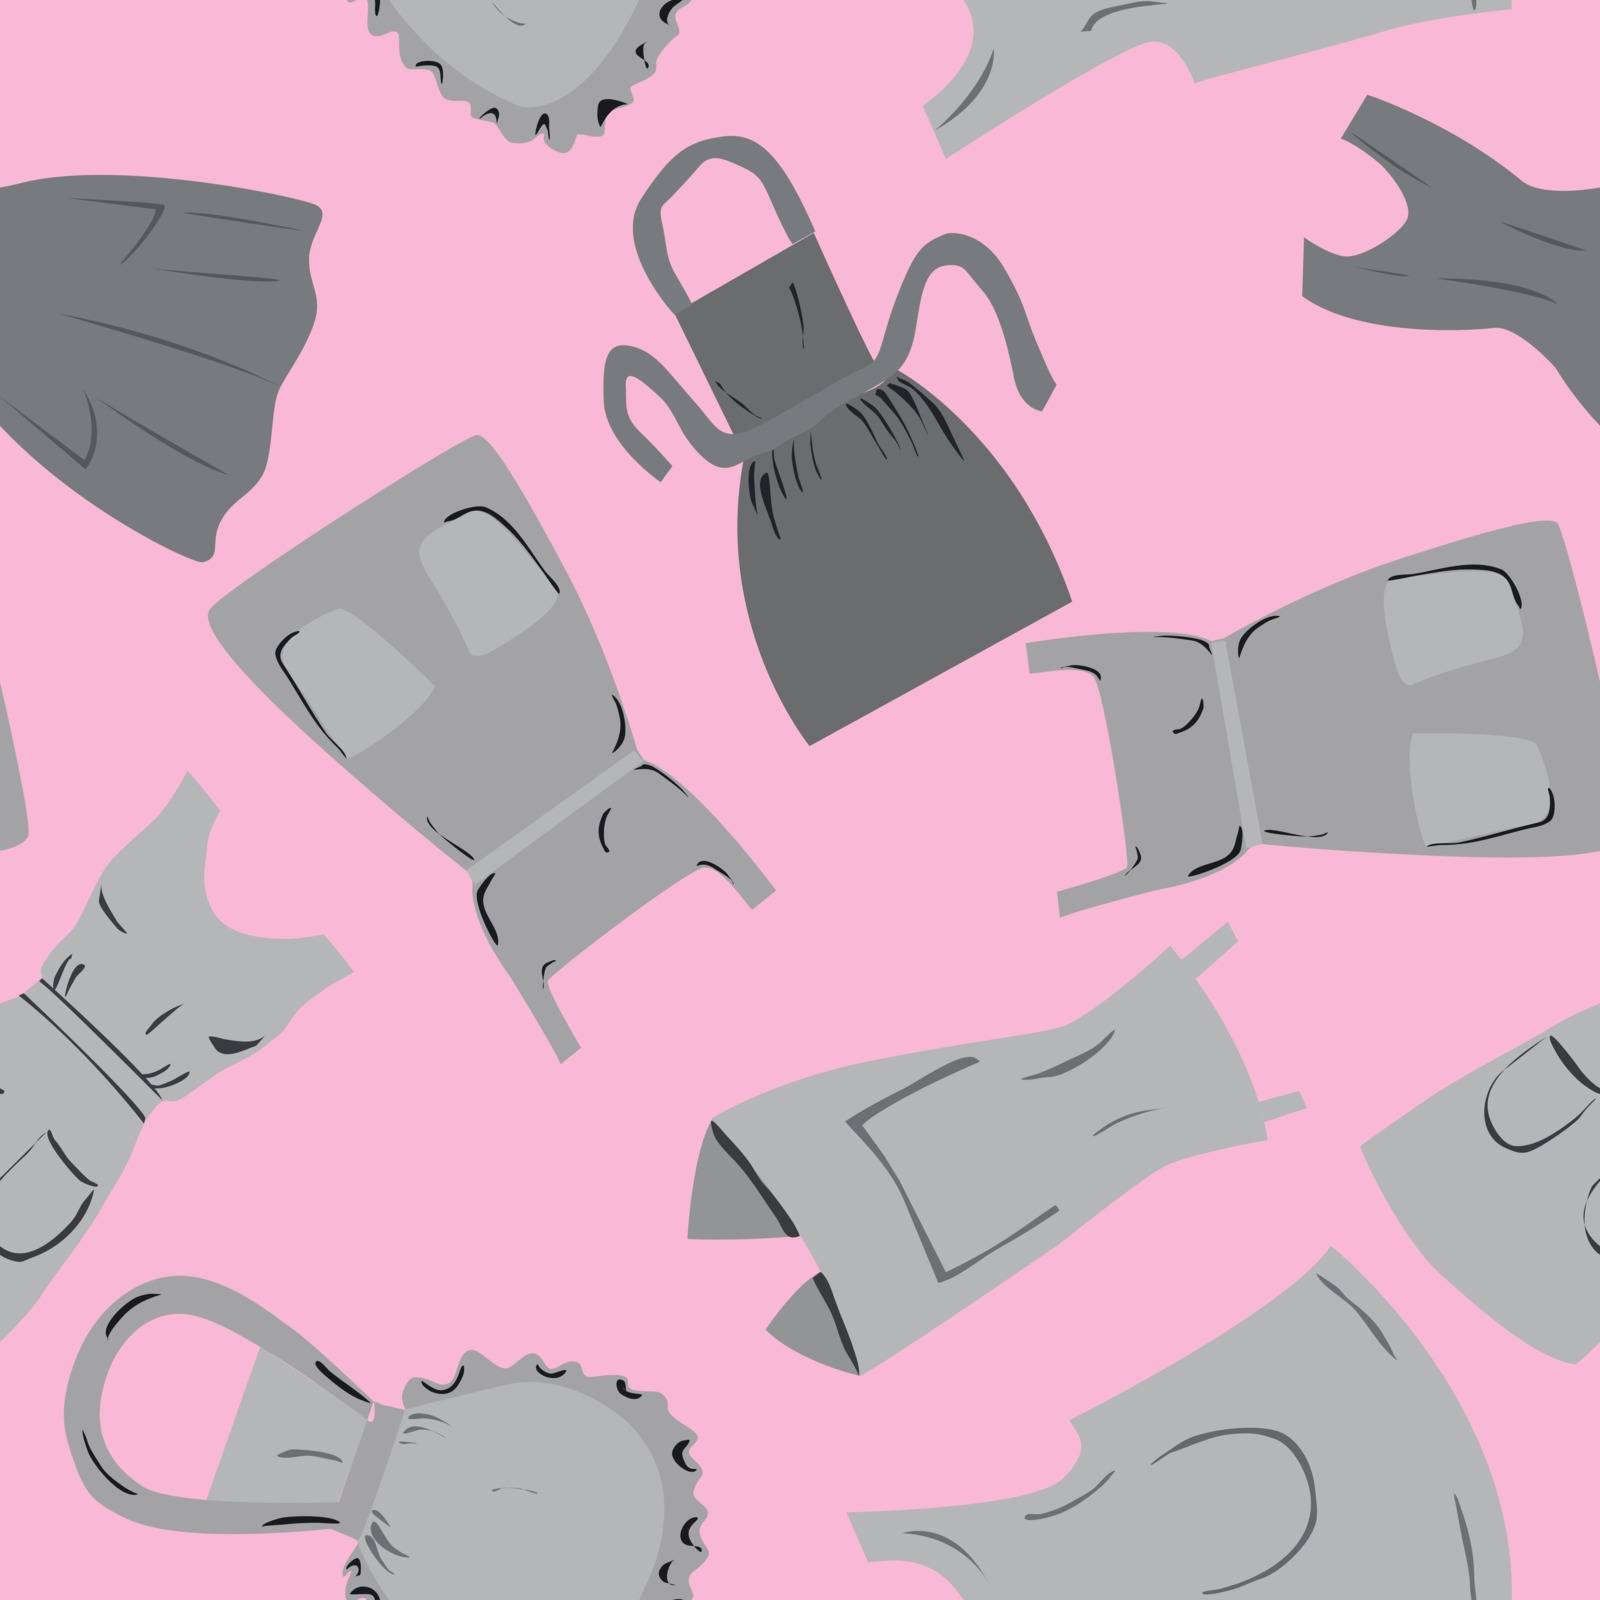 Repeat pattern with retro aprons on pink background. Flat cartoon style Vector illustration.